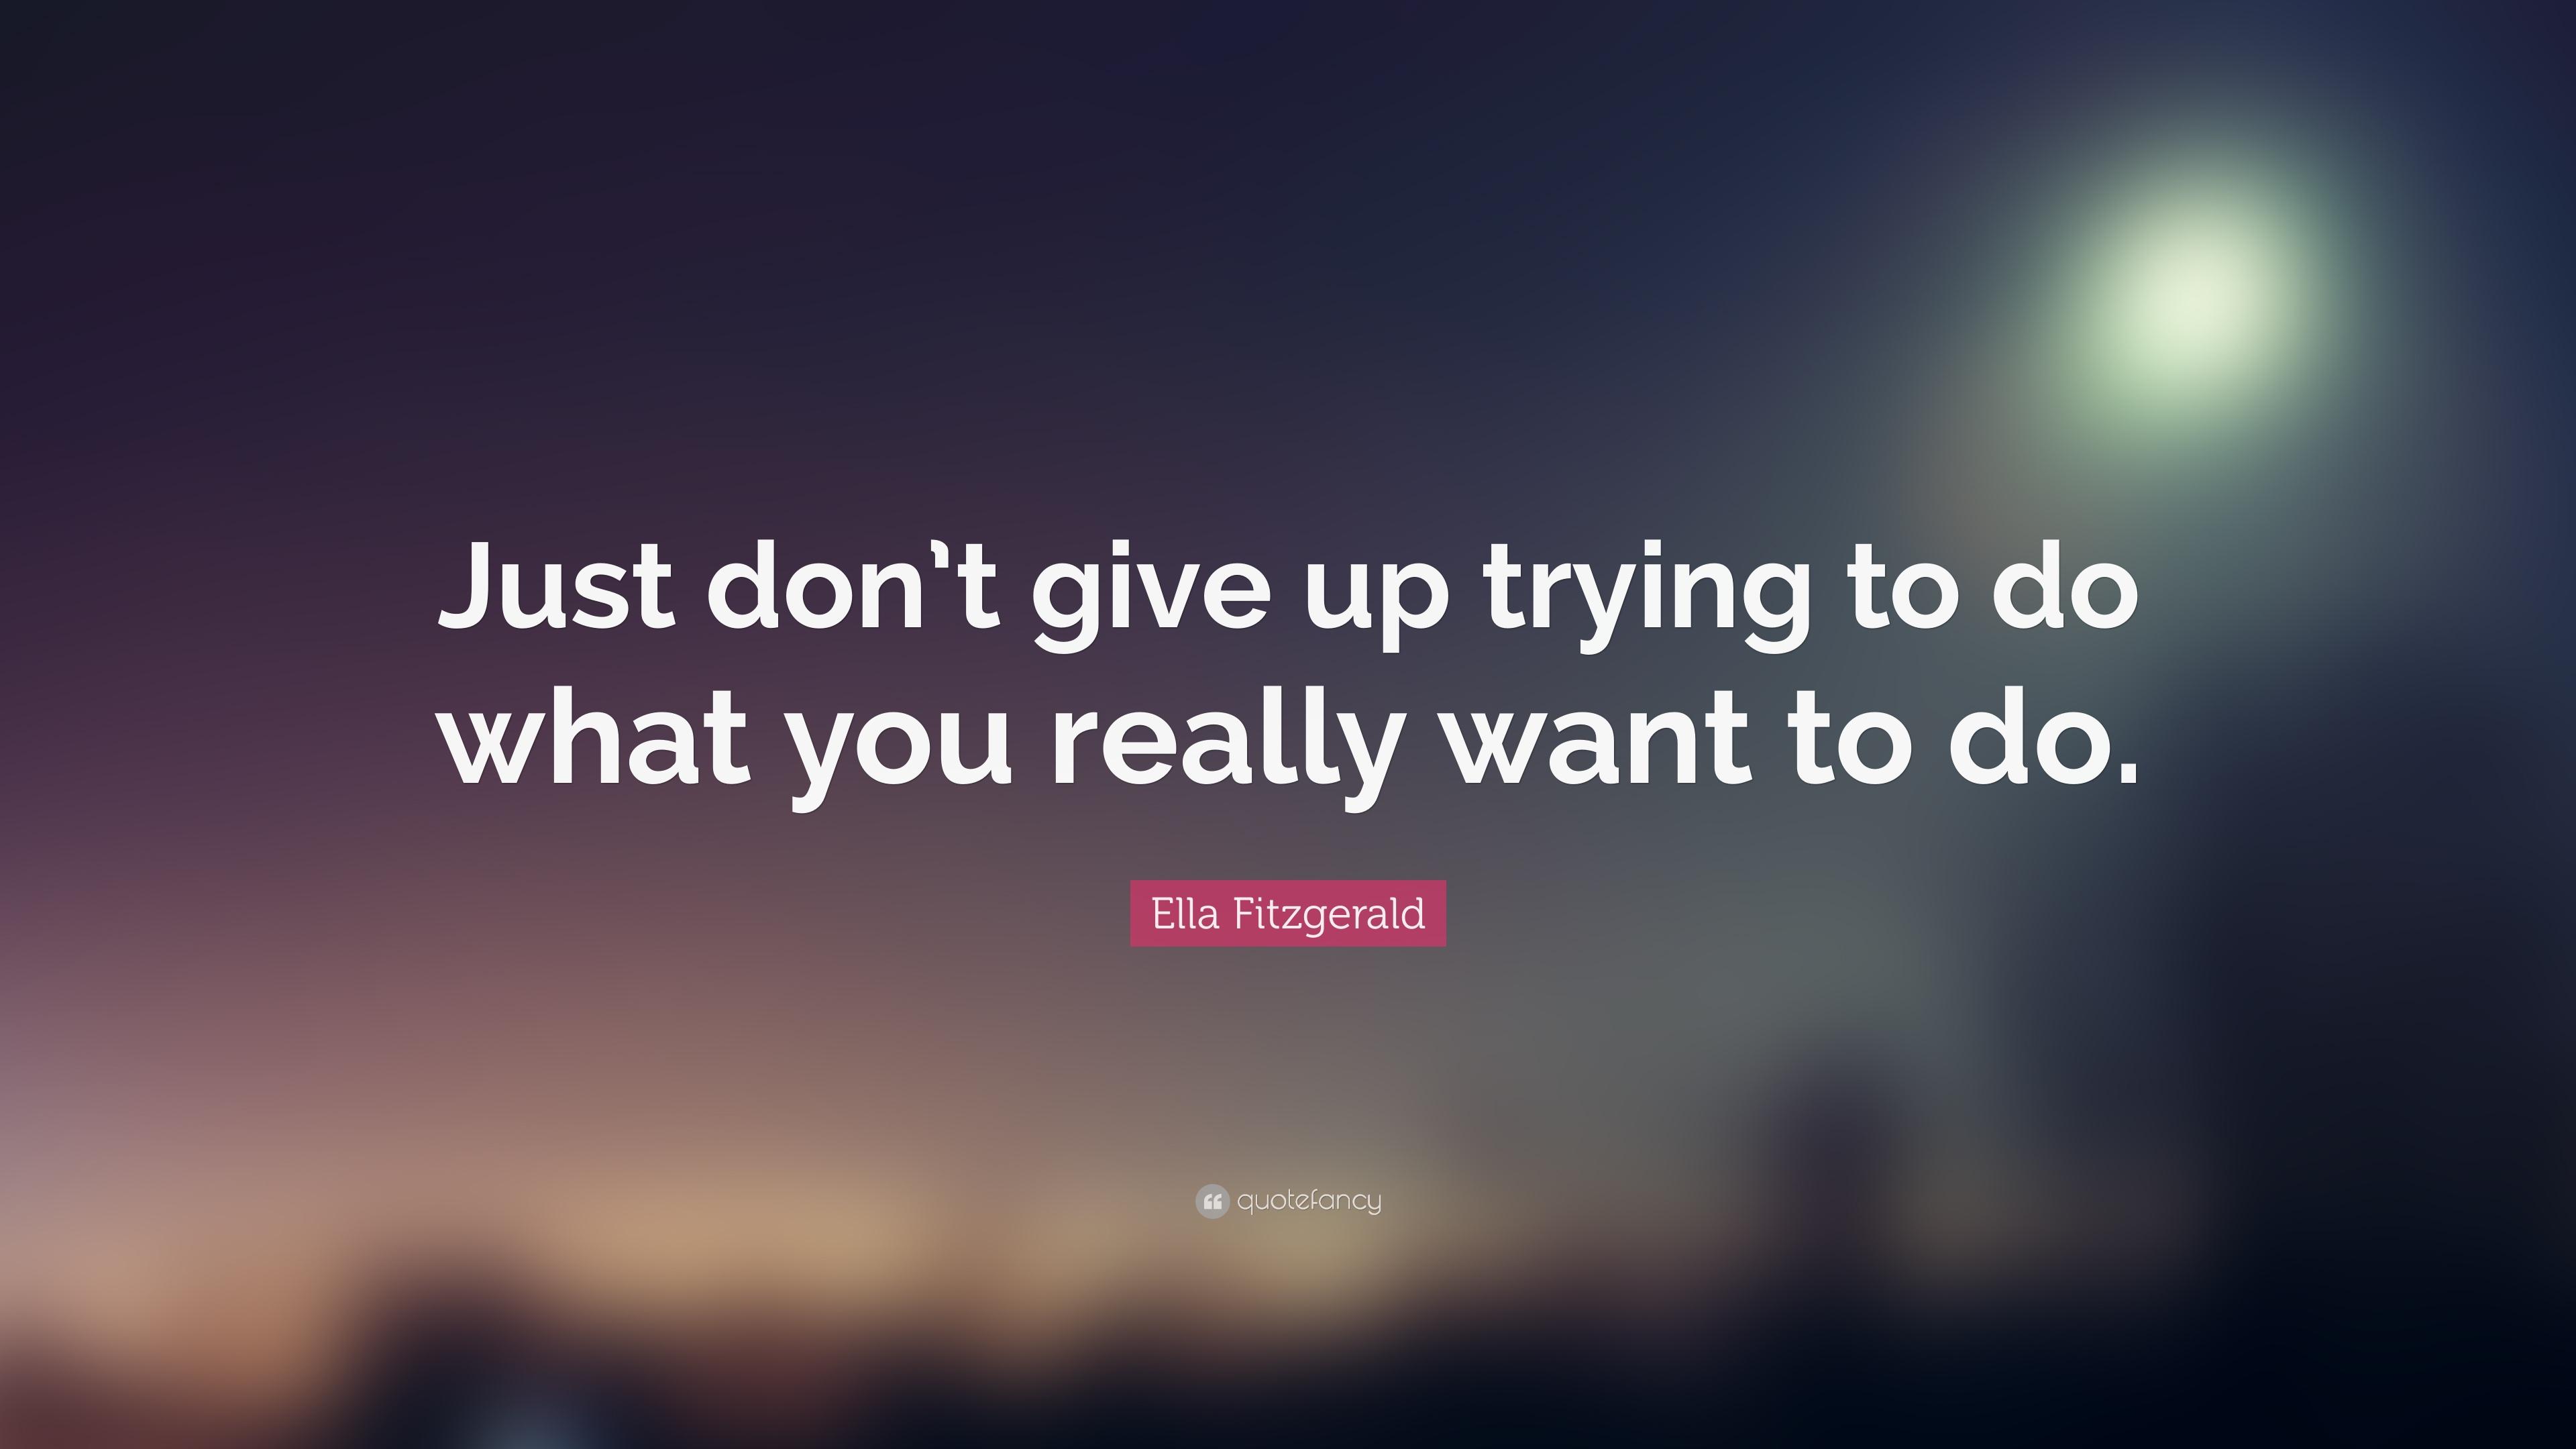 Ella Fitzgerald Quote: “Just don't give up trying to do what you